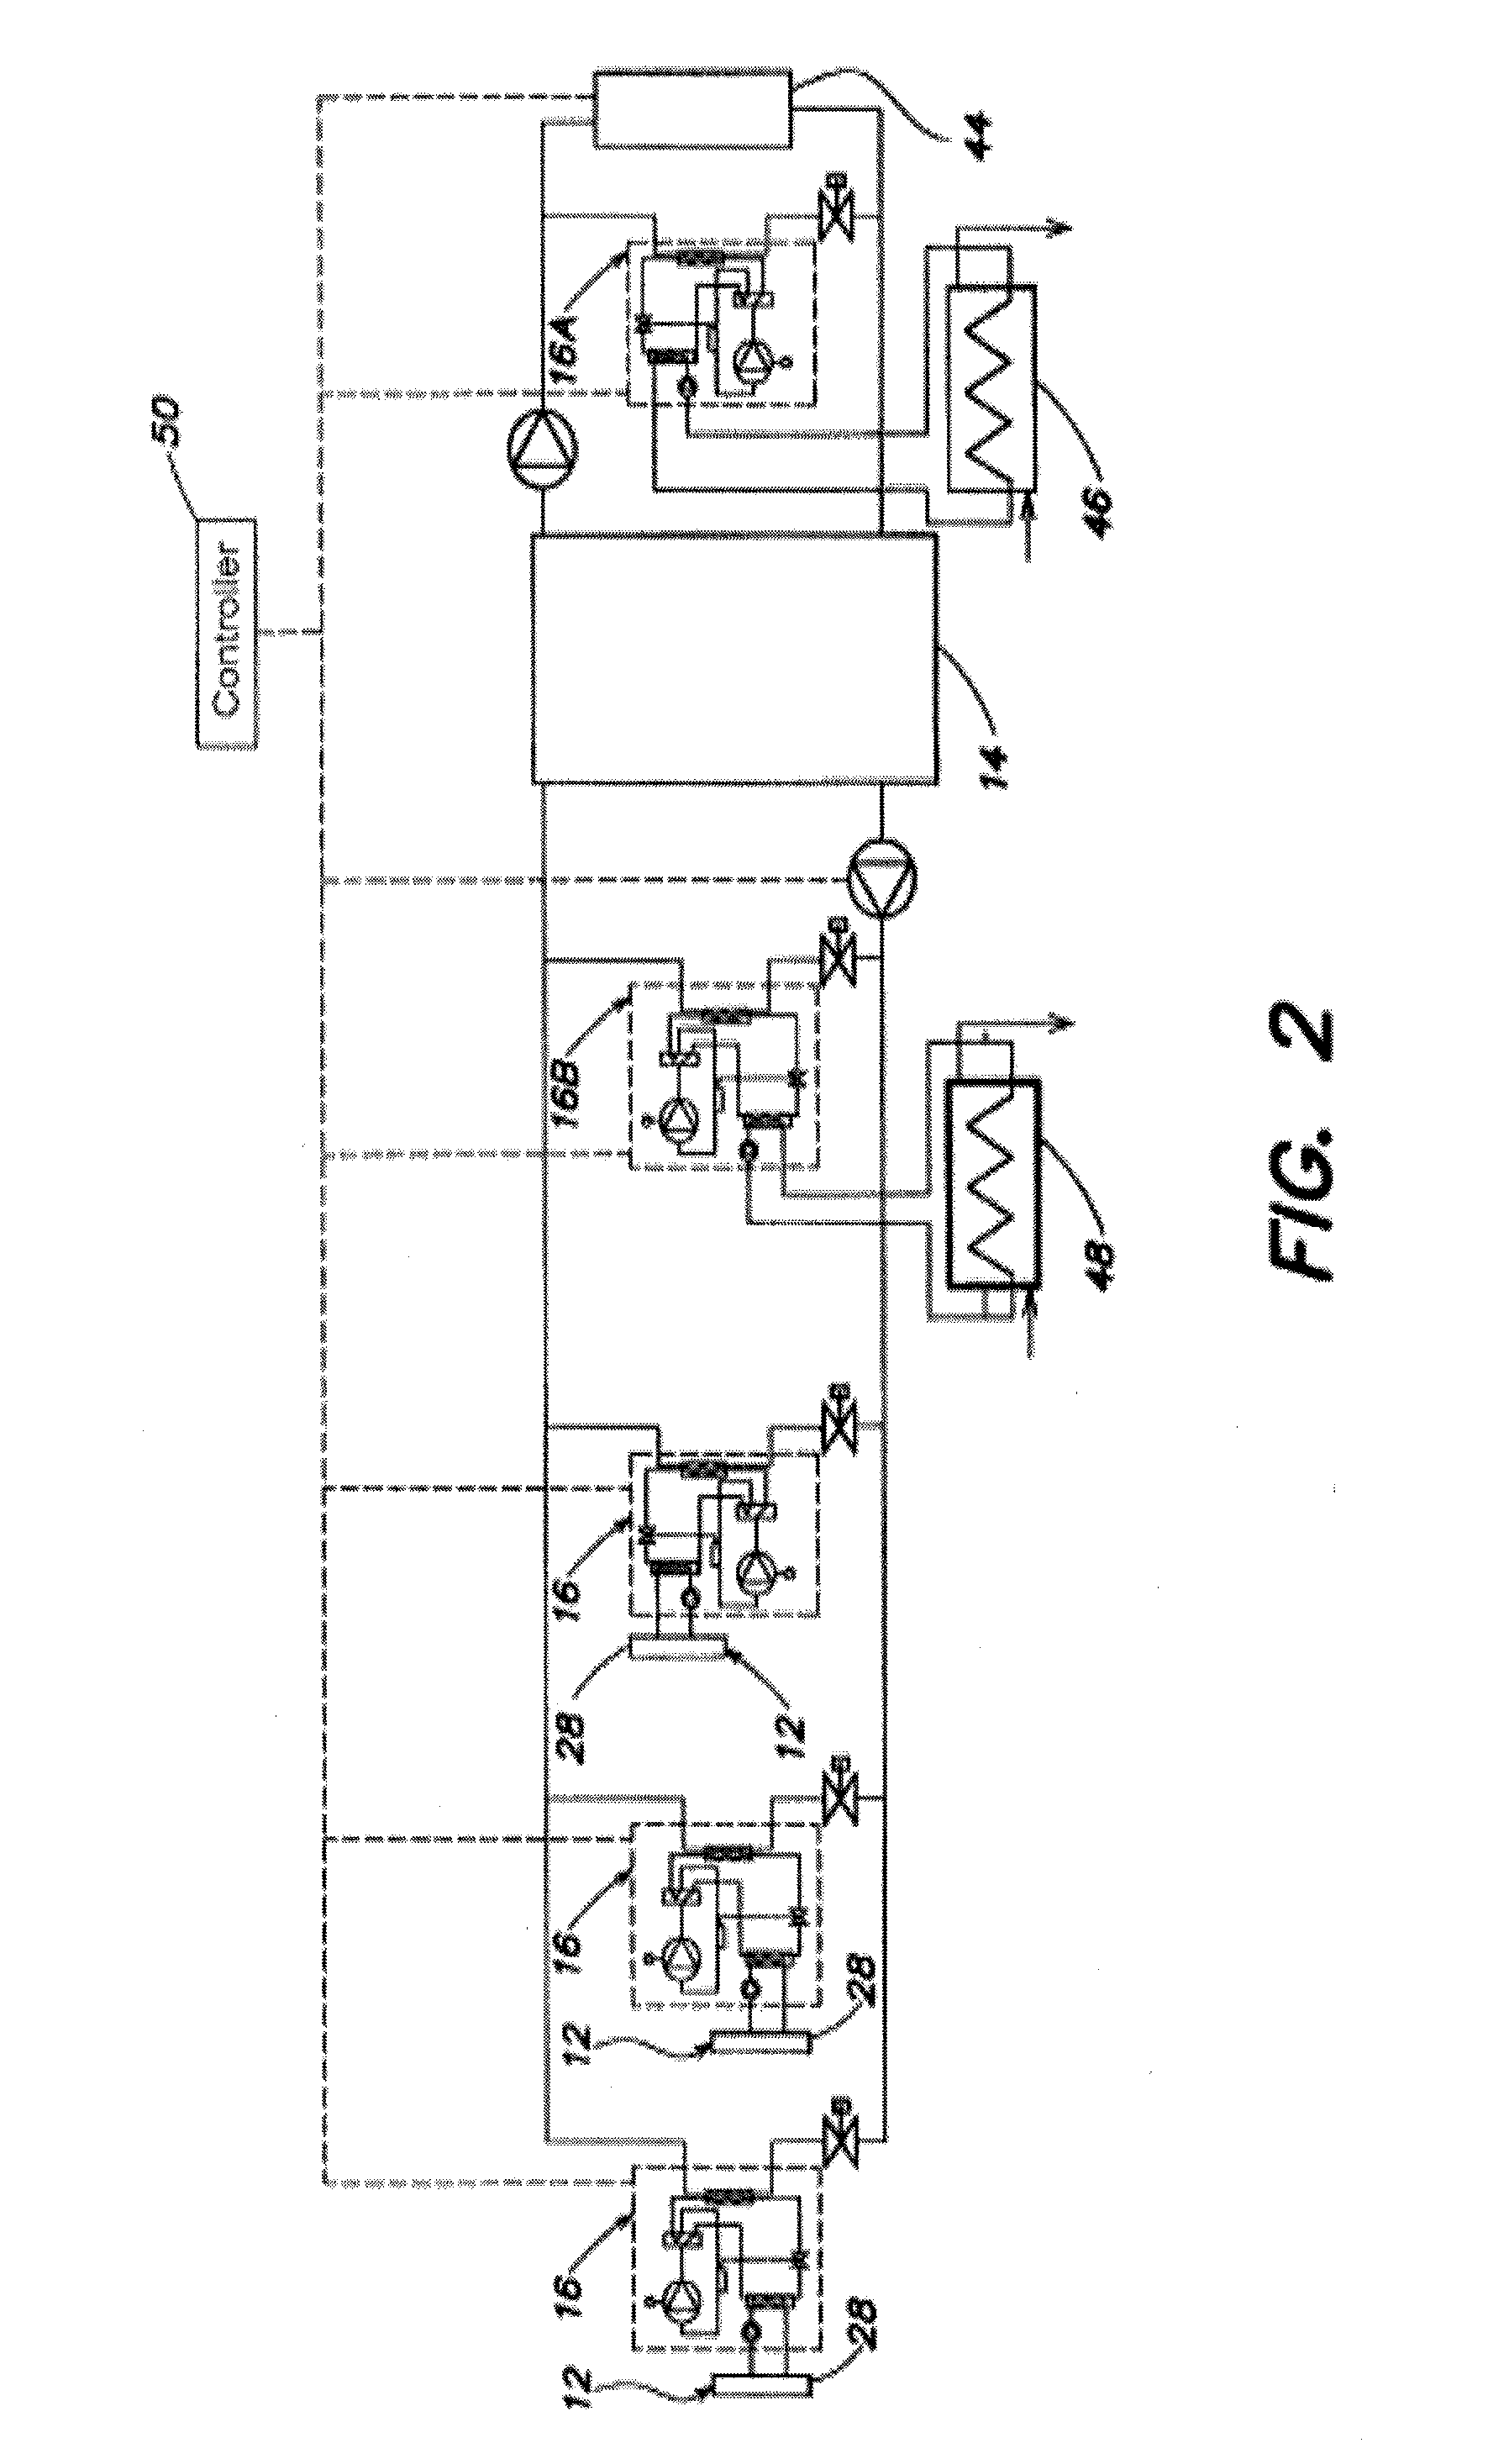 System and method for maintaining air temperature within a building HVAC system